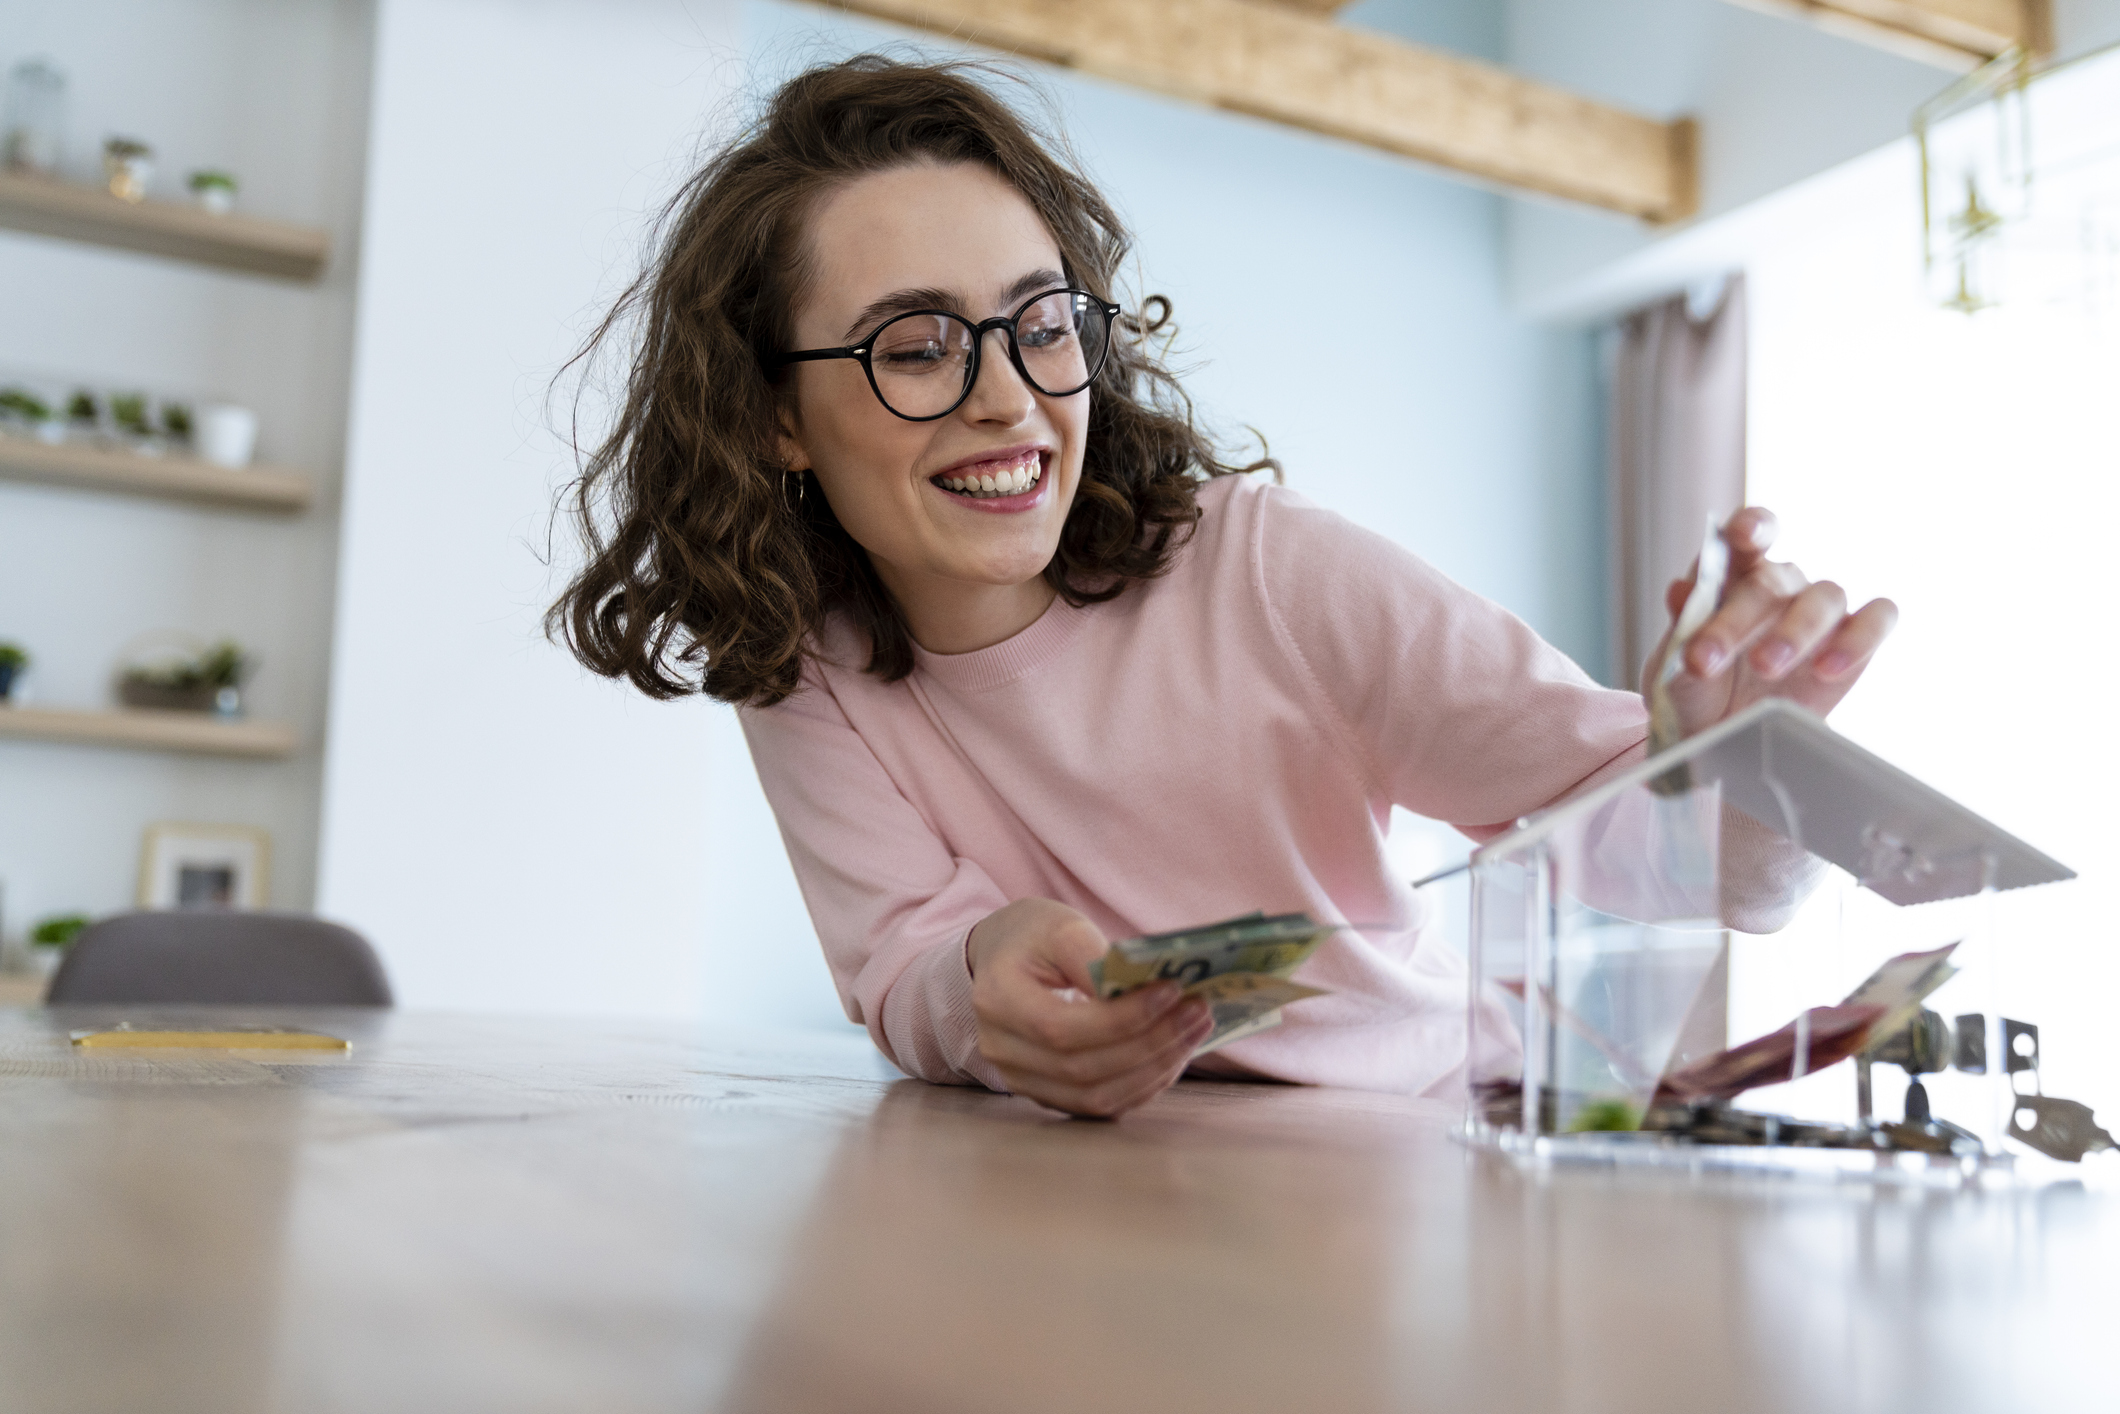 Happy woman saving money in piggy bank at home